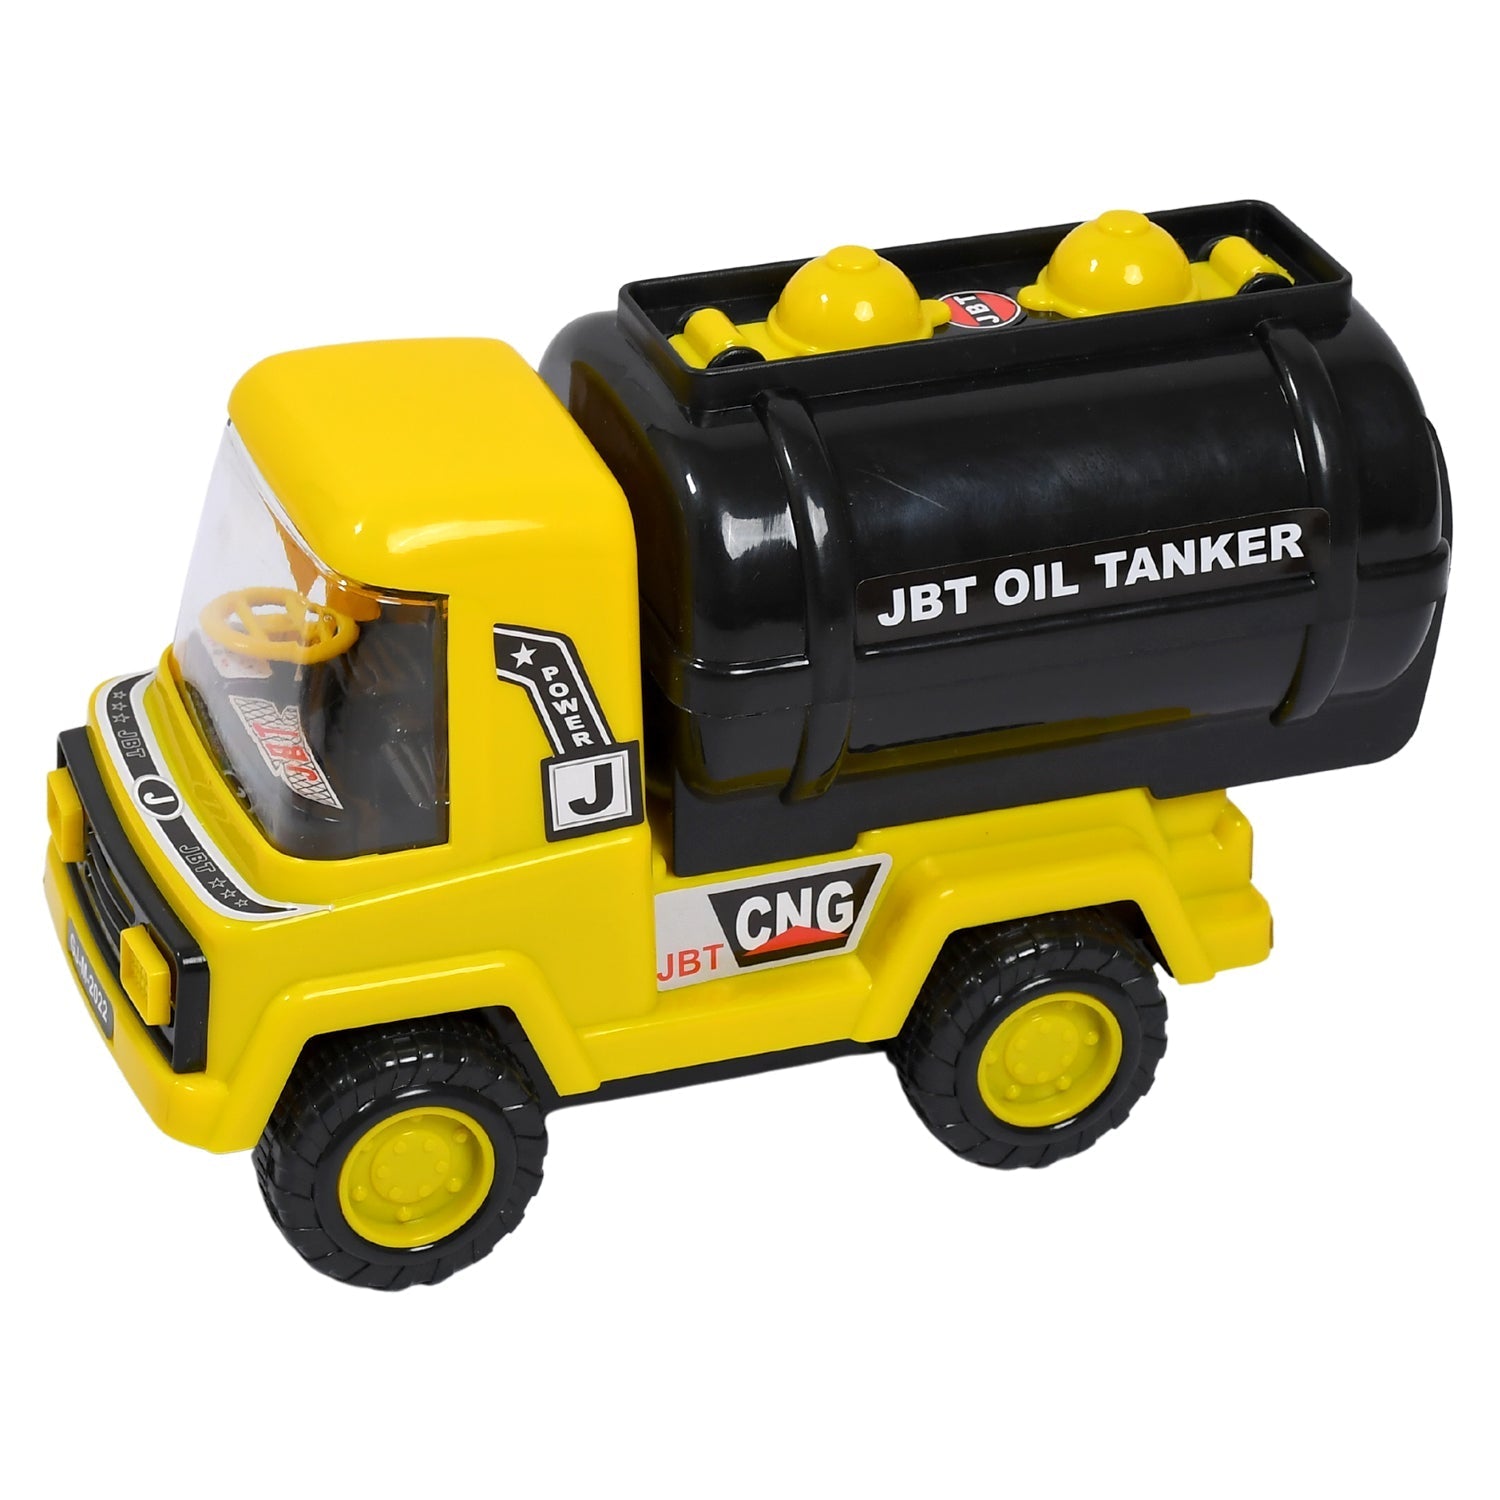 4484 Big Size Heavy Duty Unbreakable Friction Powered with Engine Sound While Running | Non Electric Toy |Tempo Oil - Water Tanker Vehicle Truck for Kids Size DeoDap